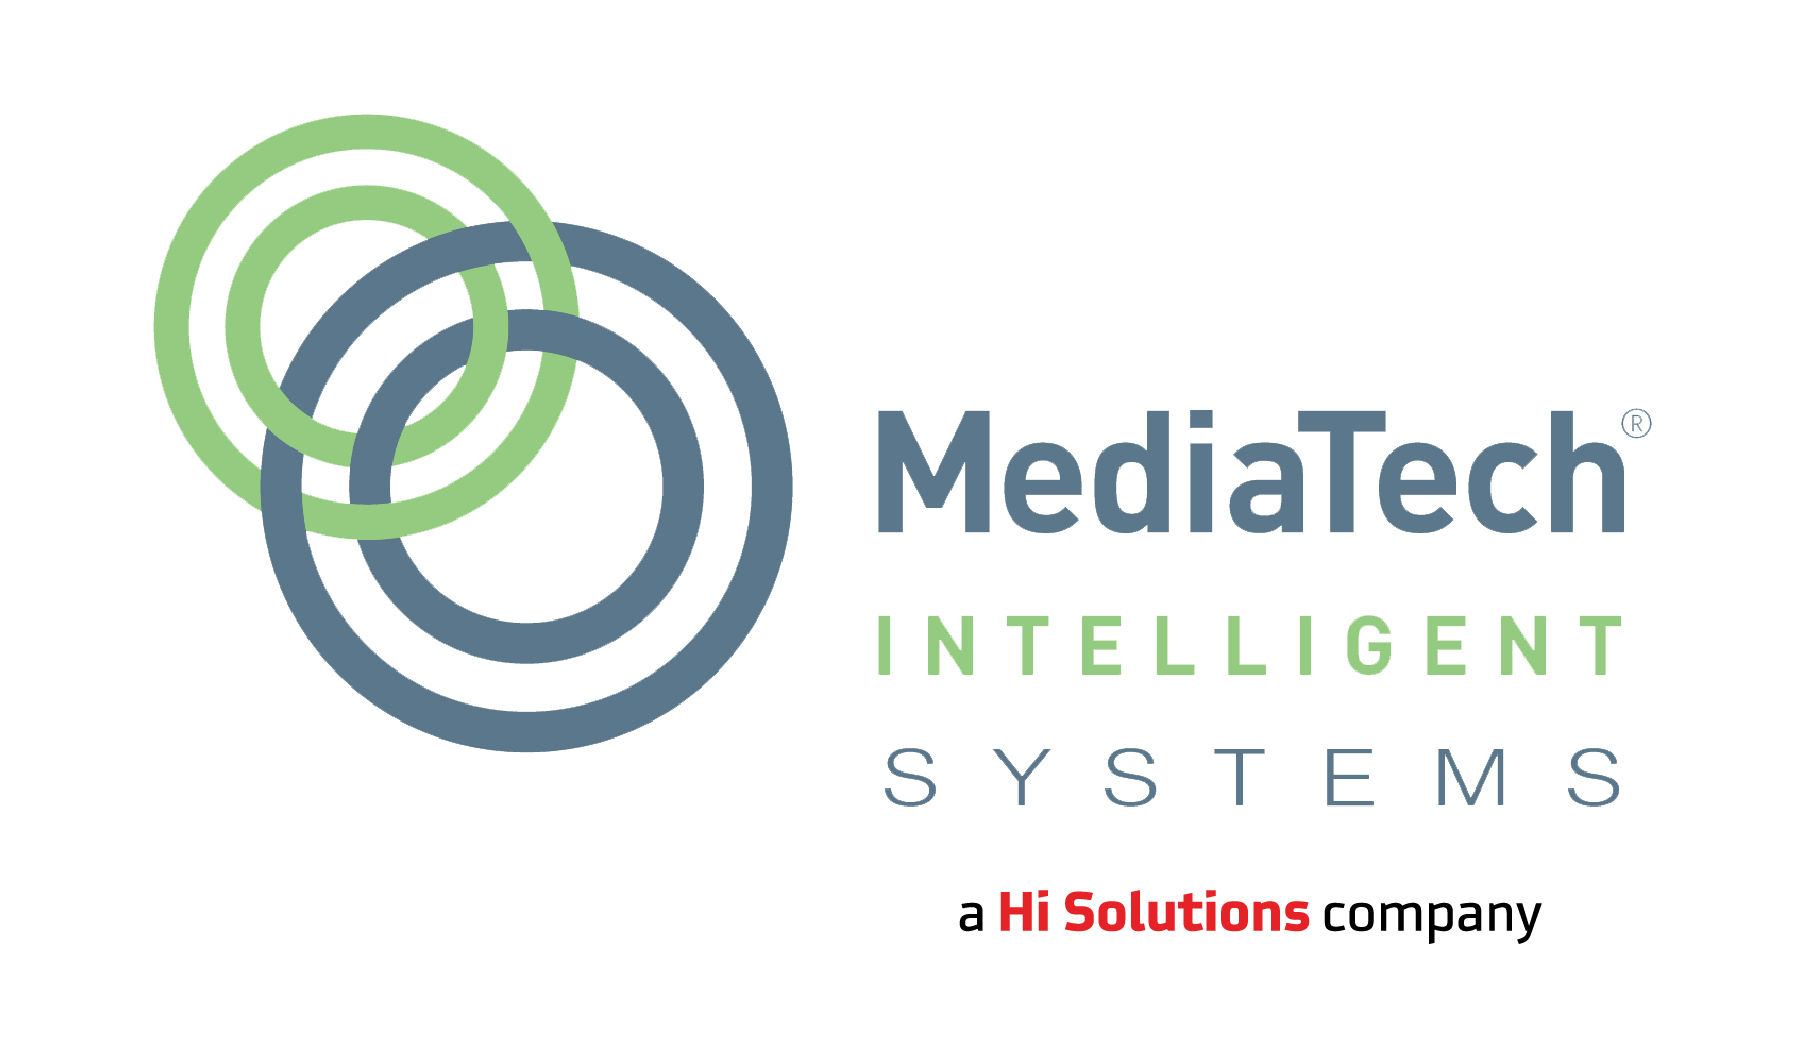 Hi Solutions Welcomes MediaTech Intelligent Systems to the Family